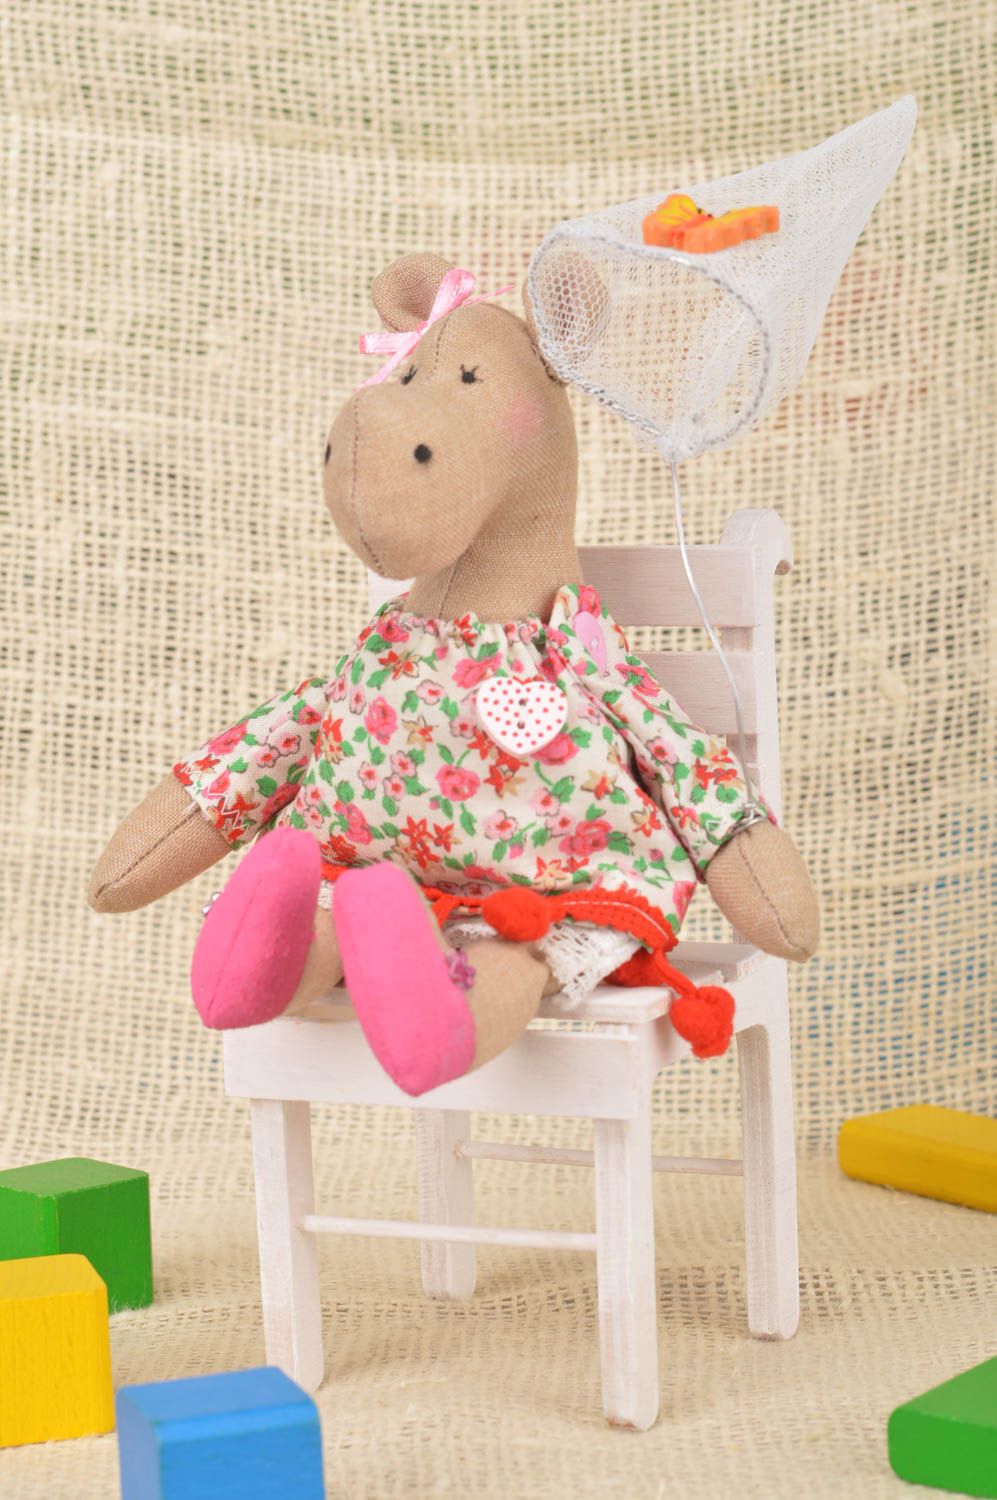 Beautiful homemade soft toy stuffed toy for kids interior decorating gift ideas photo 1